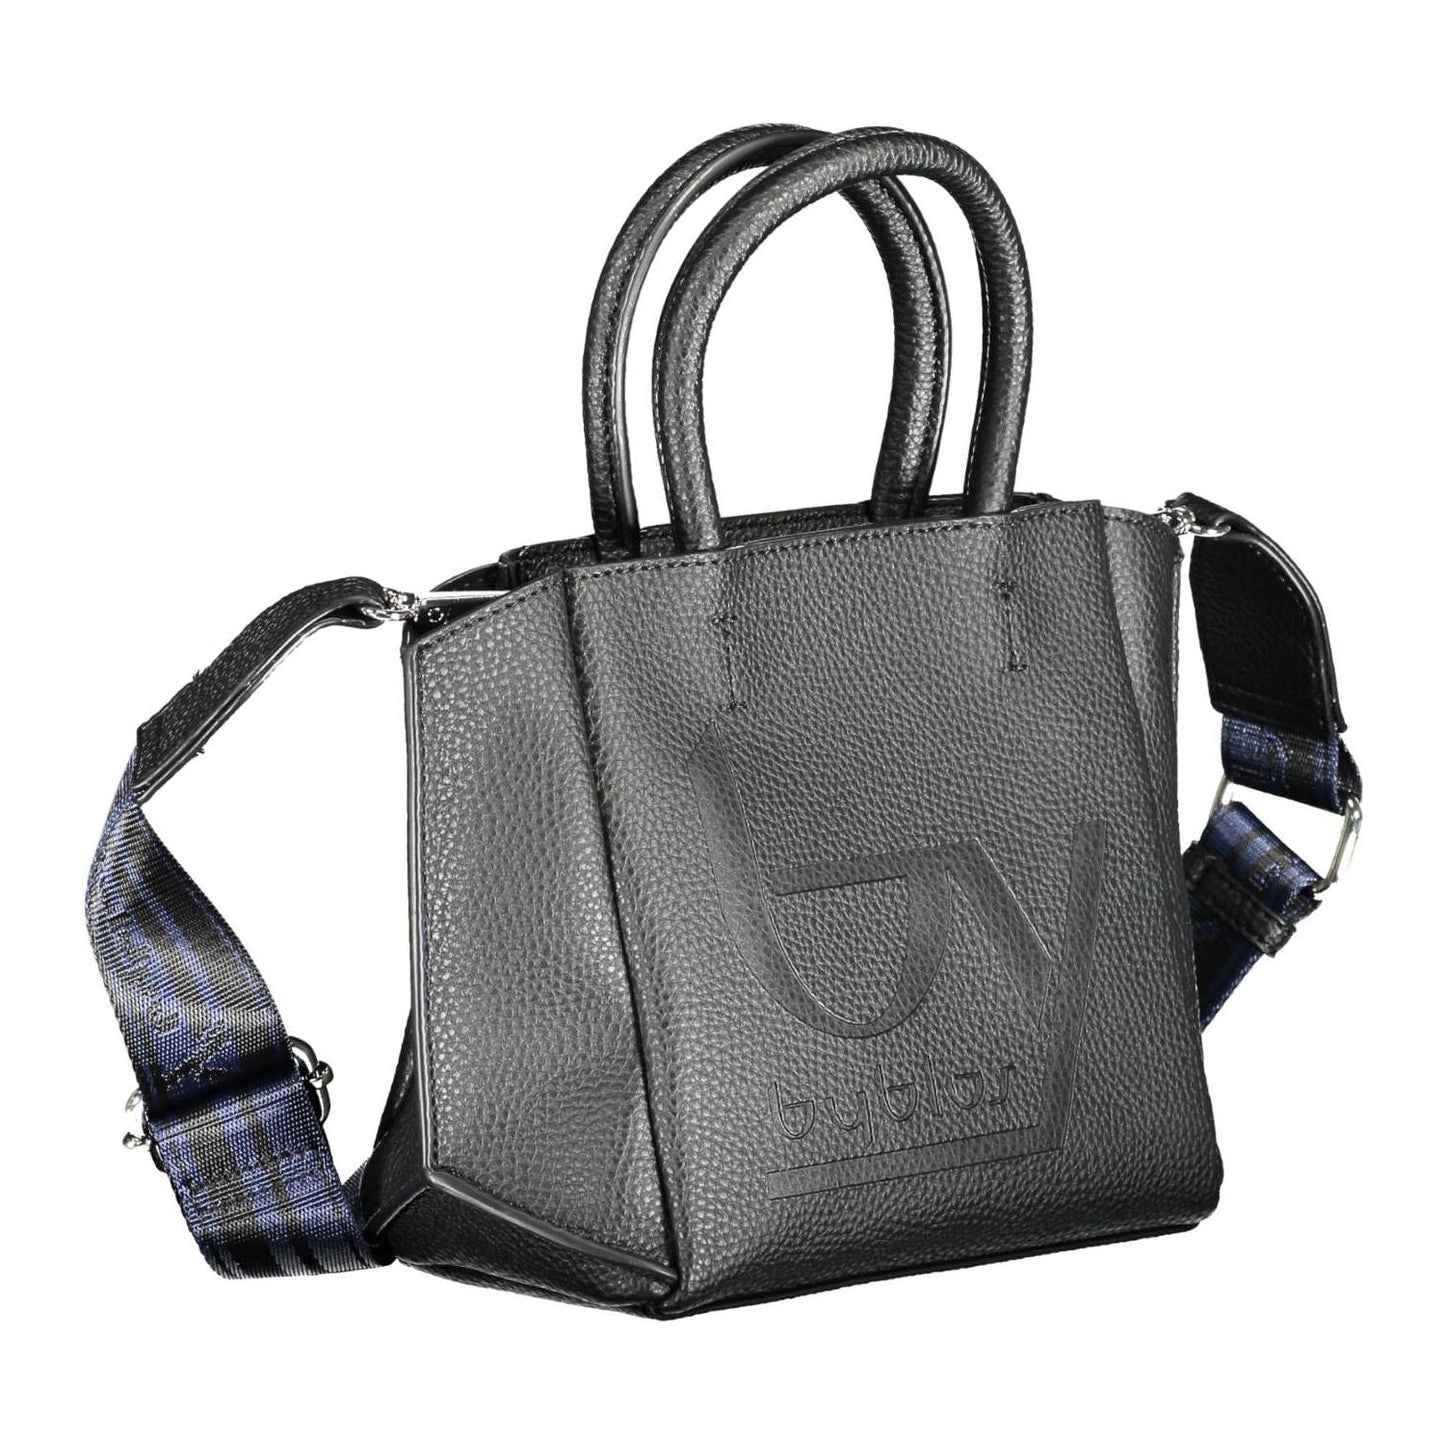 BYBLOS Elegant Black Two-Handle Tote with Shoulder Strap elegant-black-two-handle-tote-with-shoulder-strap